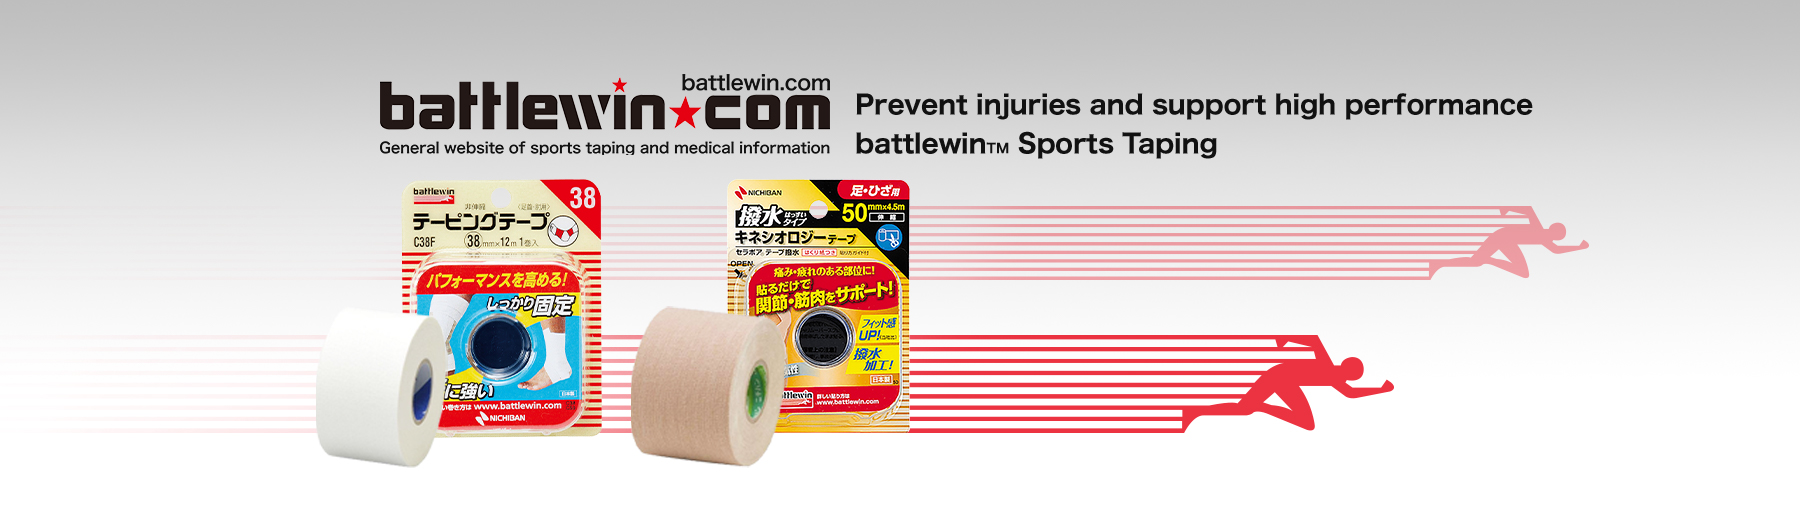 General website of sports taping and medical information
Prevent injuries and support high performance
battlewin.comTM Sports Taping